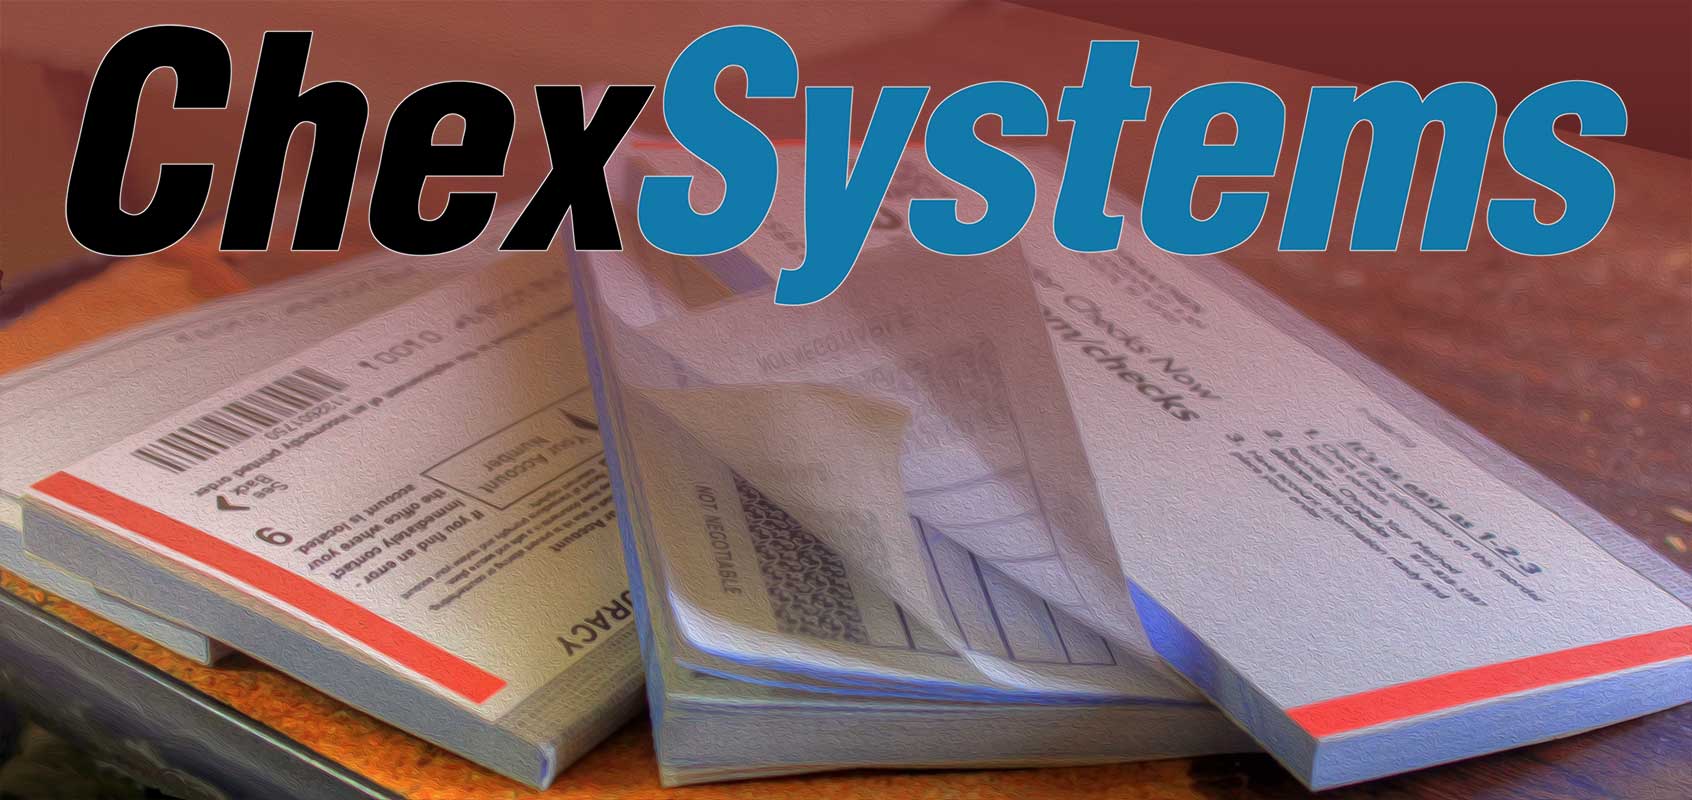 The 24 Banks That Don’t Use ChexSystems